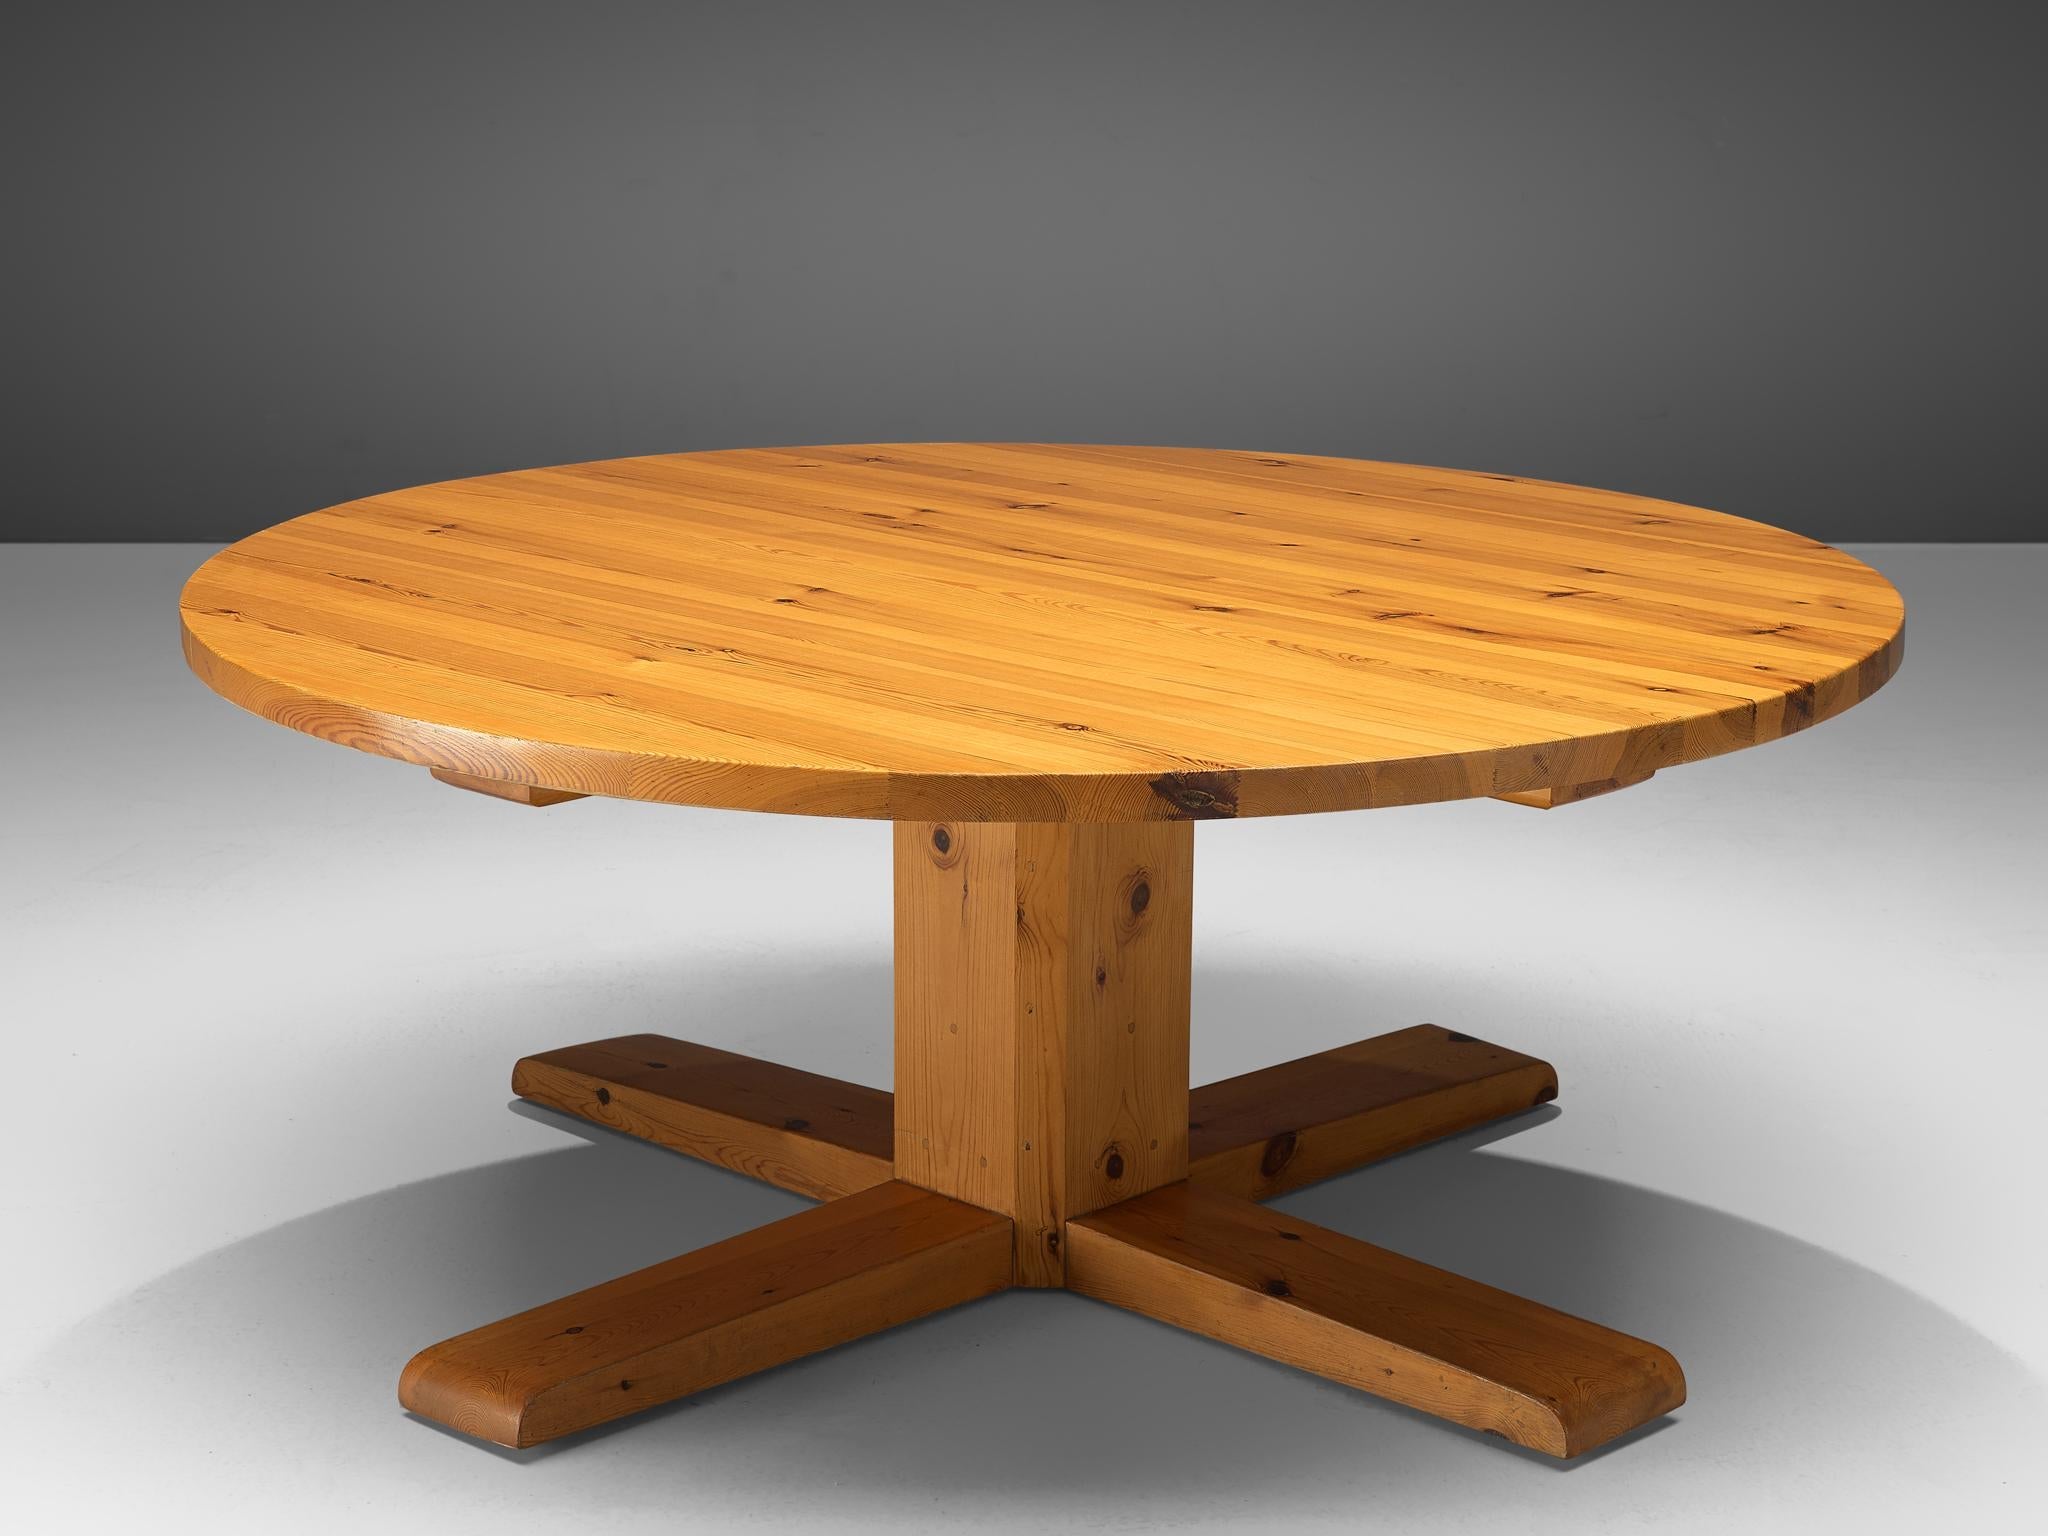 Large Round Spanish Dining Table in Solid Pine